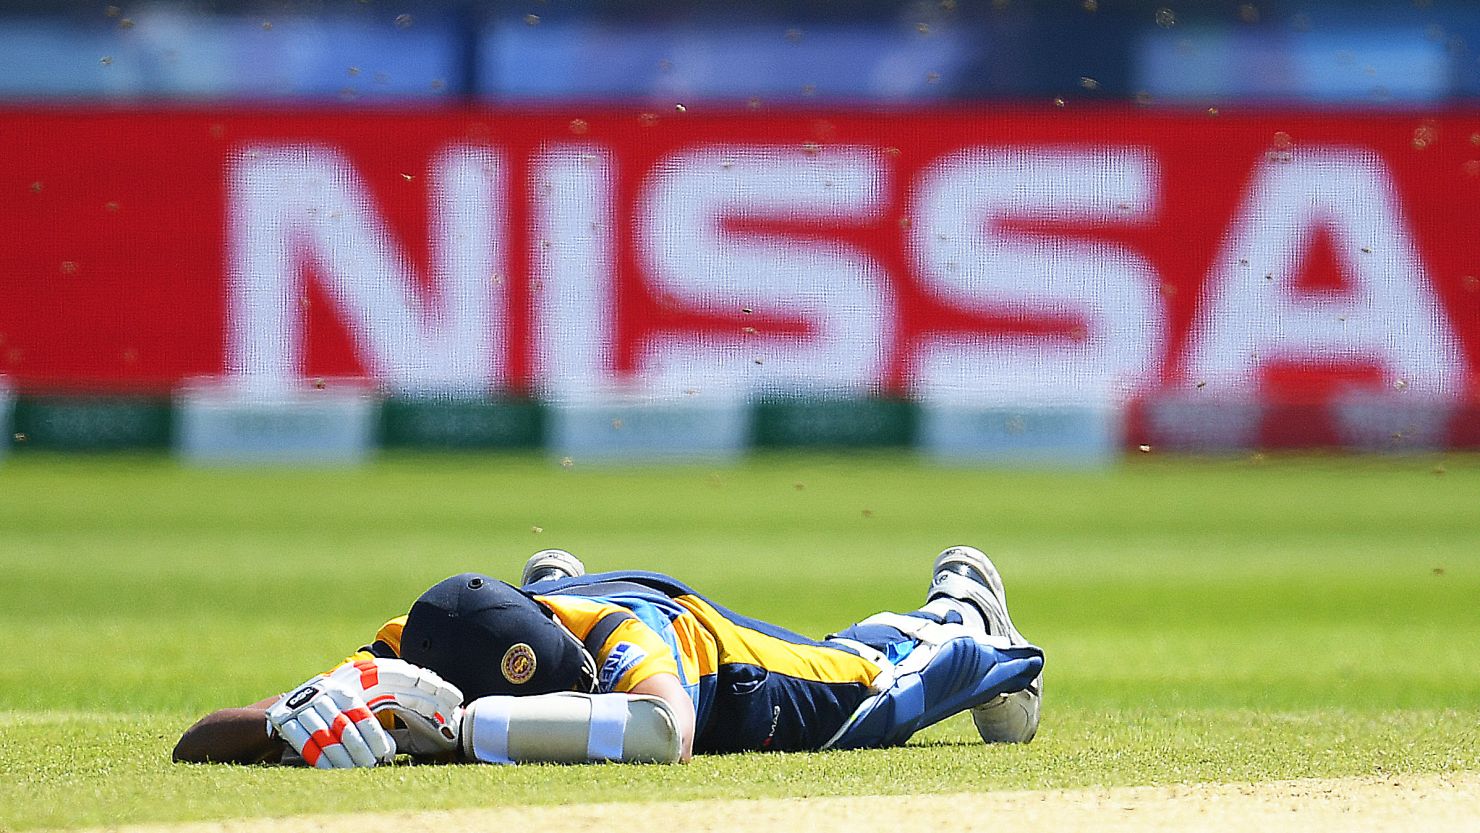 Suranga Lakmal of Sri Lanka lays down to avoid a swarm of bees at the Cricket World Cup match between Sri Lanka and South Africa.